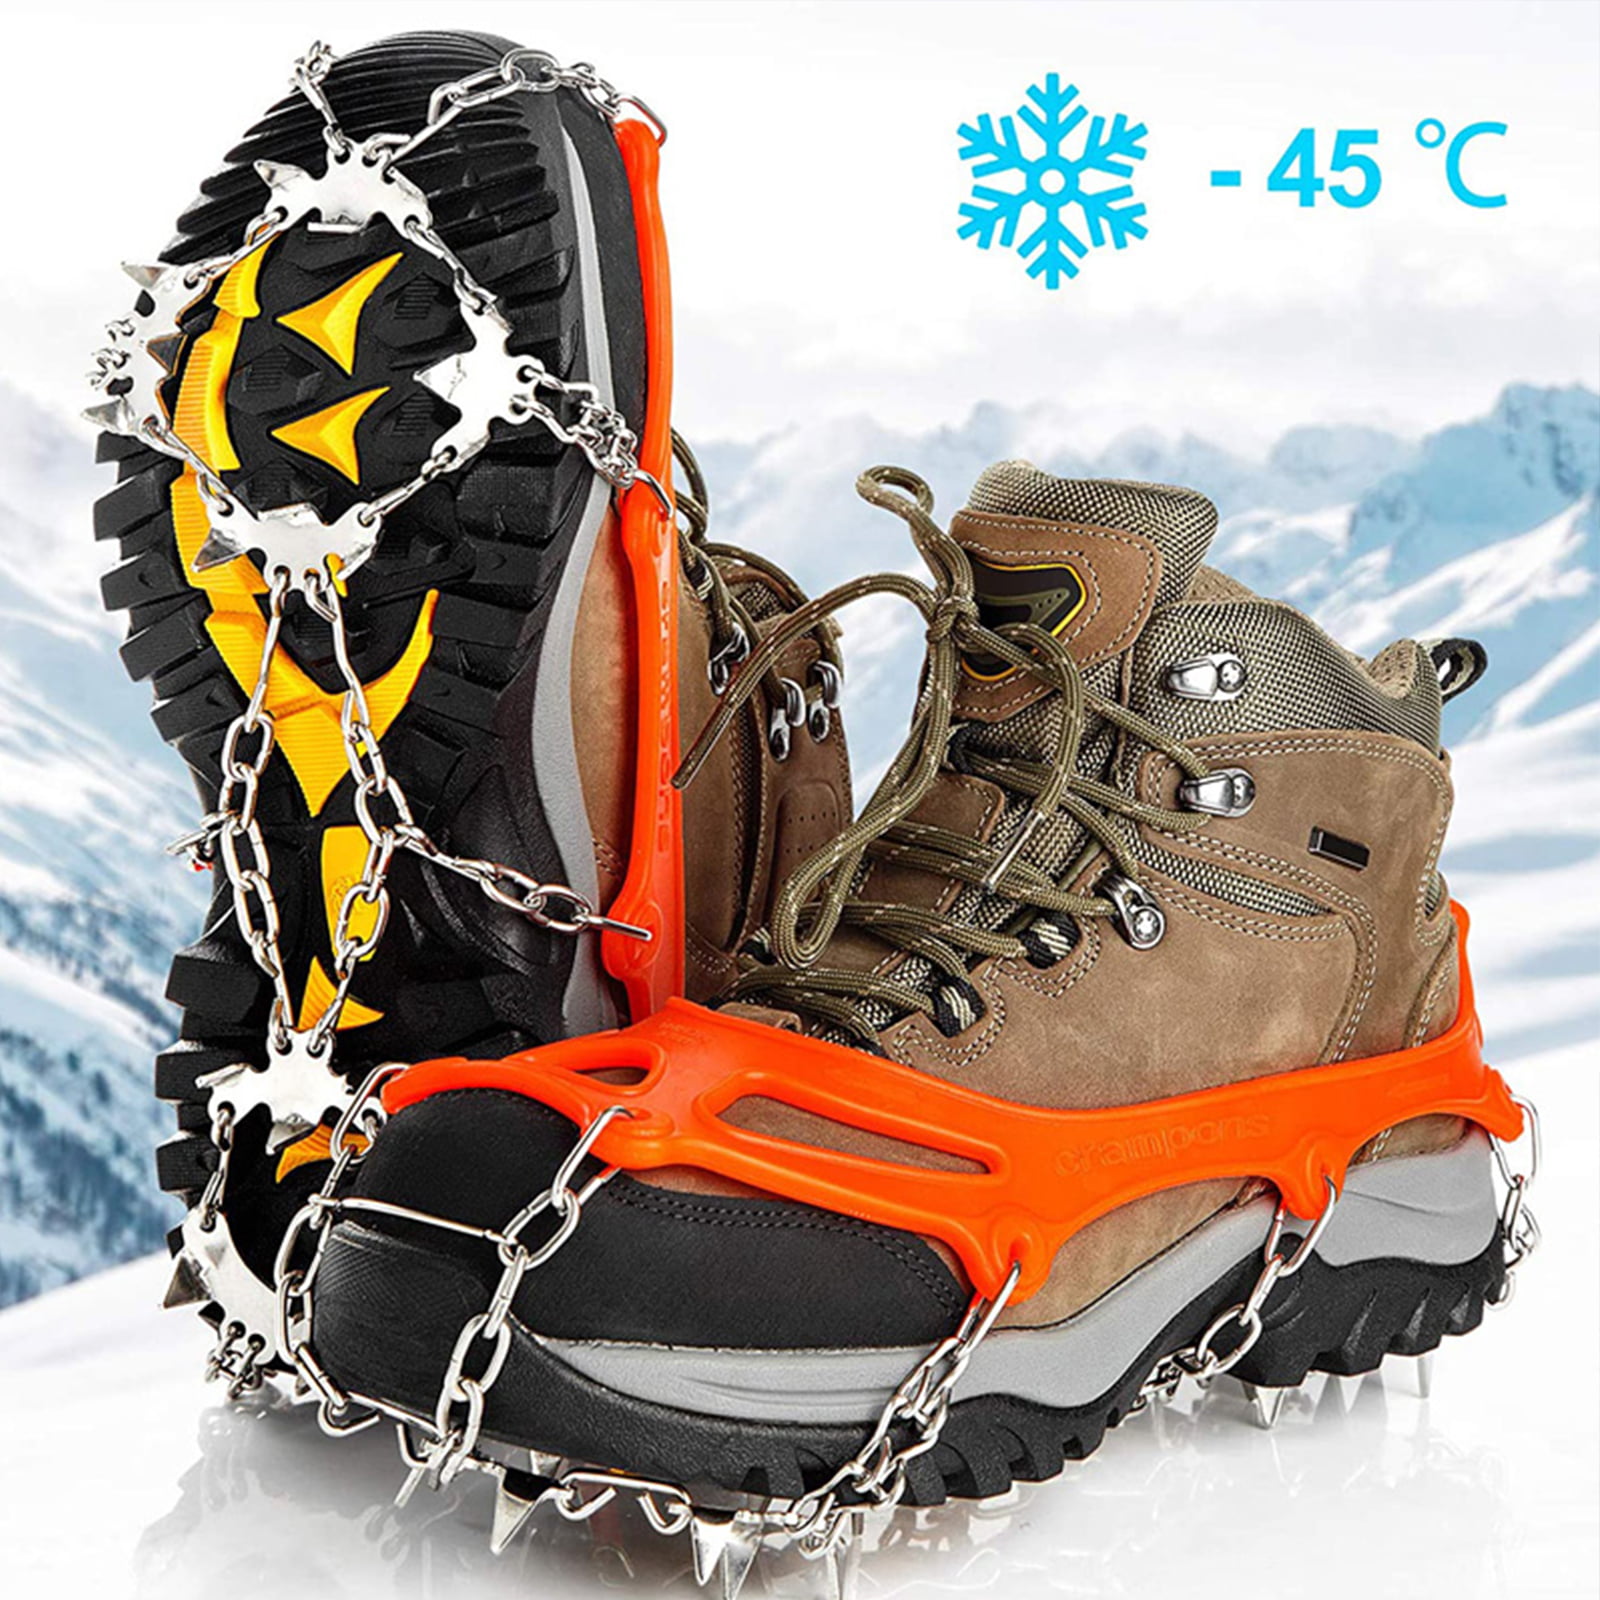 Sfee Ice Snow Grips Crampons Traction Cleats,19 Stainless Steel Spikes for Women Men Kids Anti Slip Flexible Shoe/Boot Footwear for Walking Climbing Hiking Fishing Outdoor 